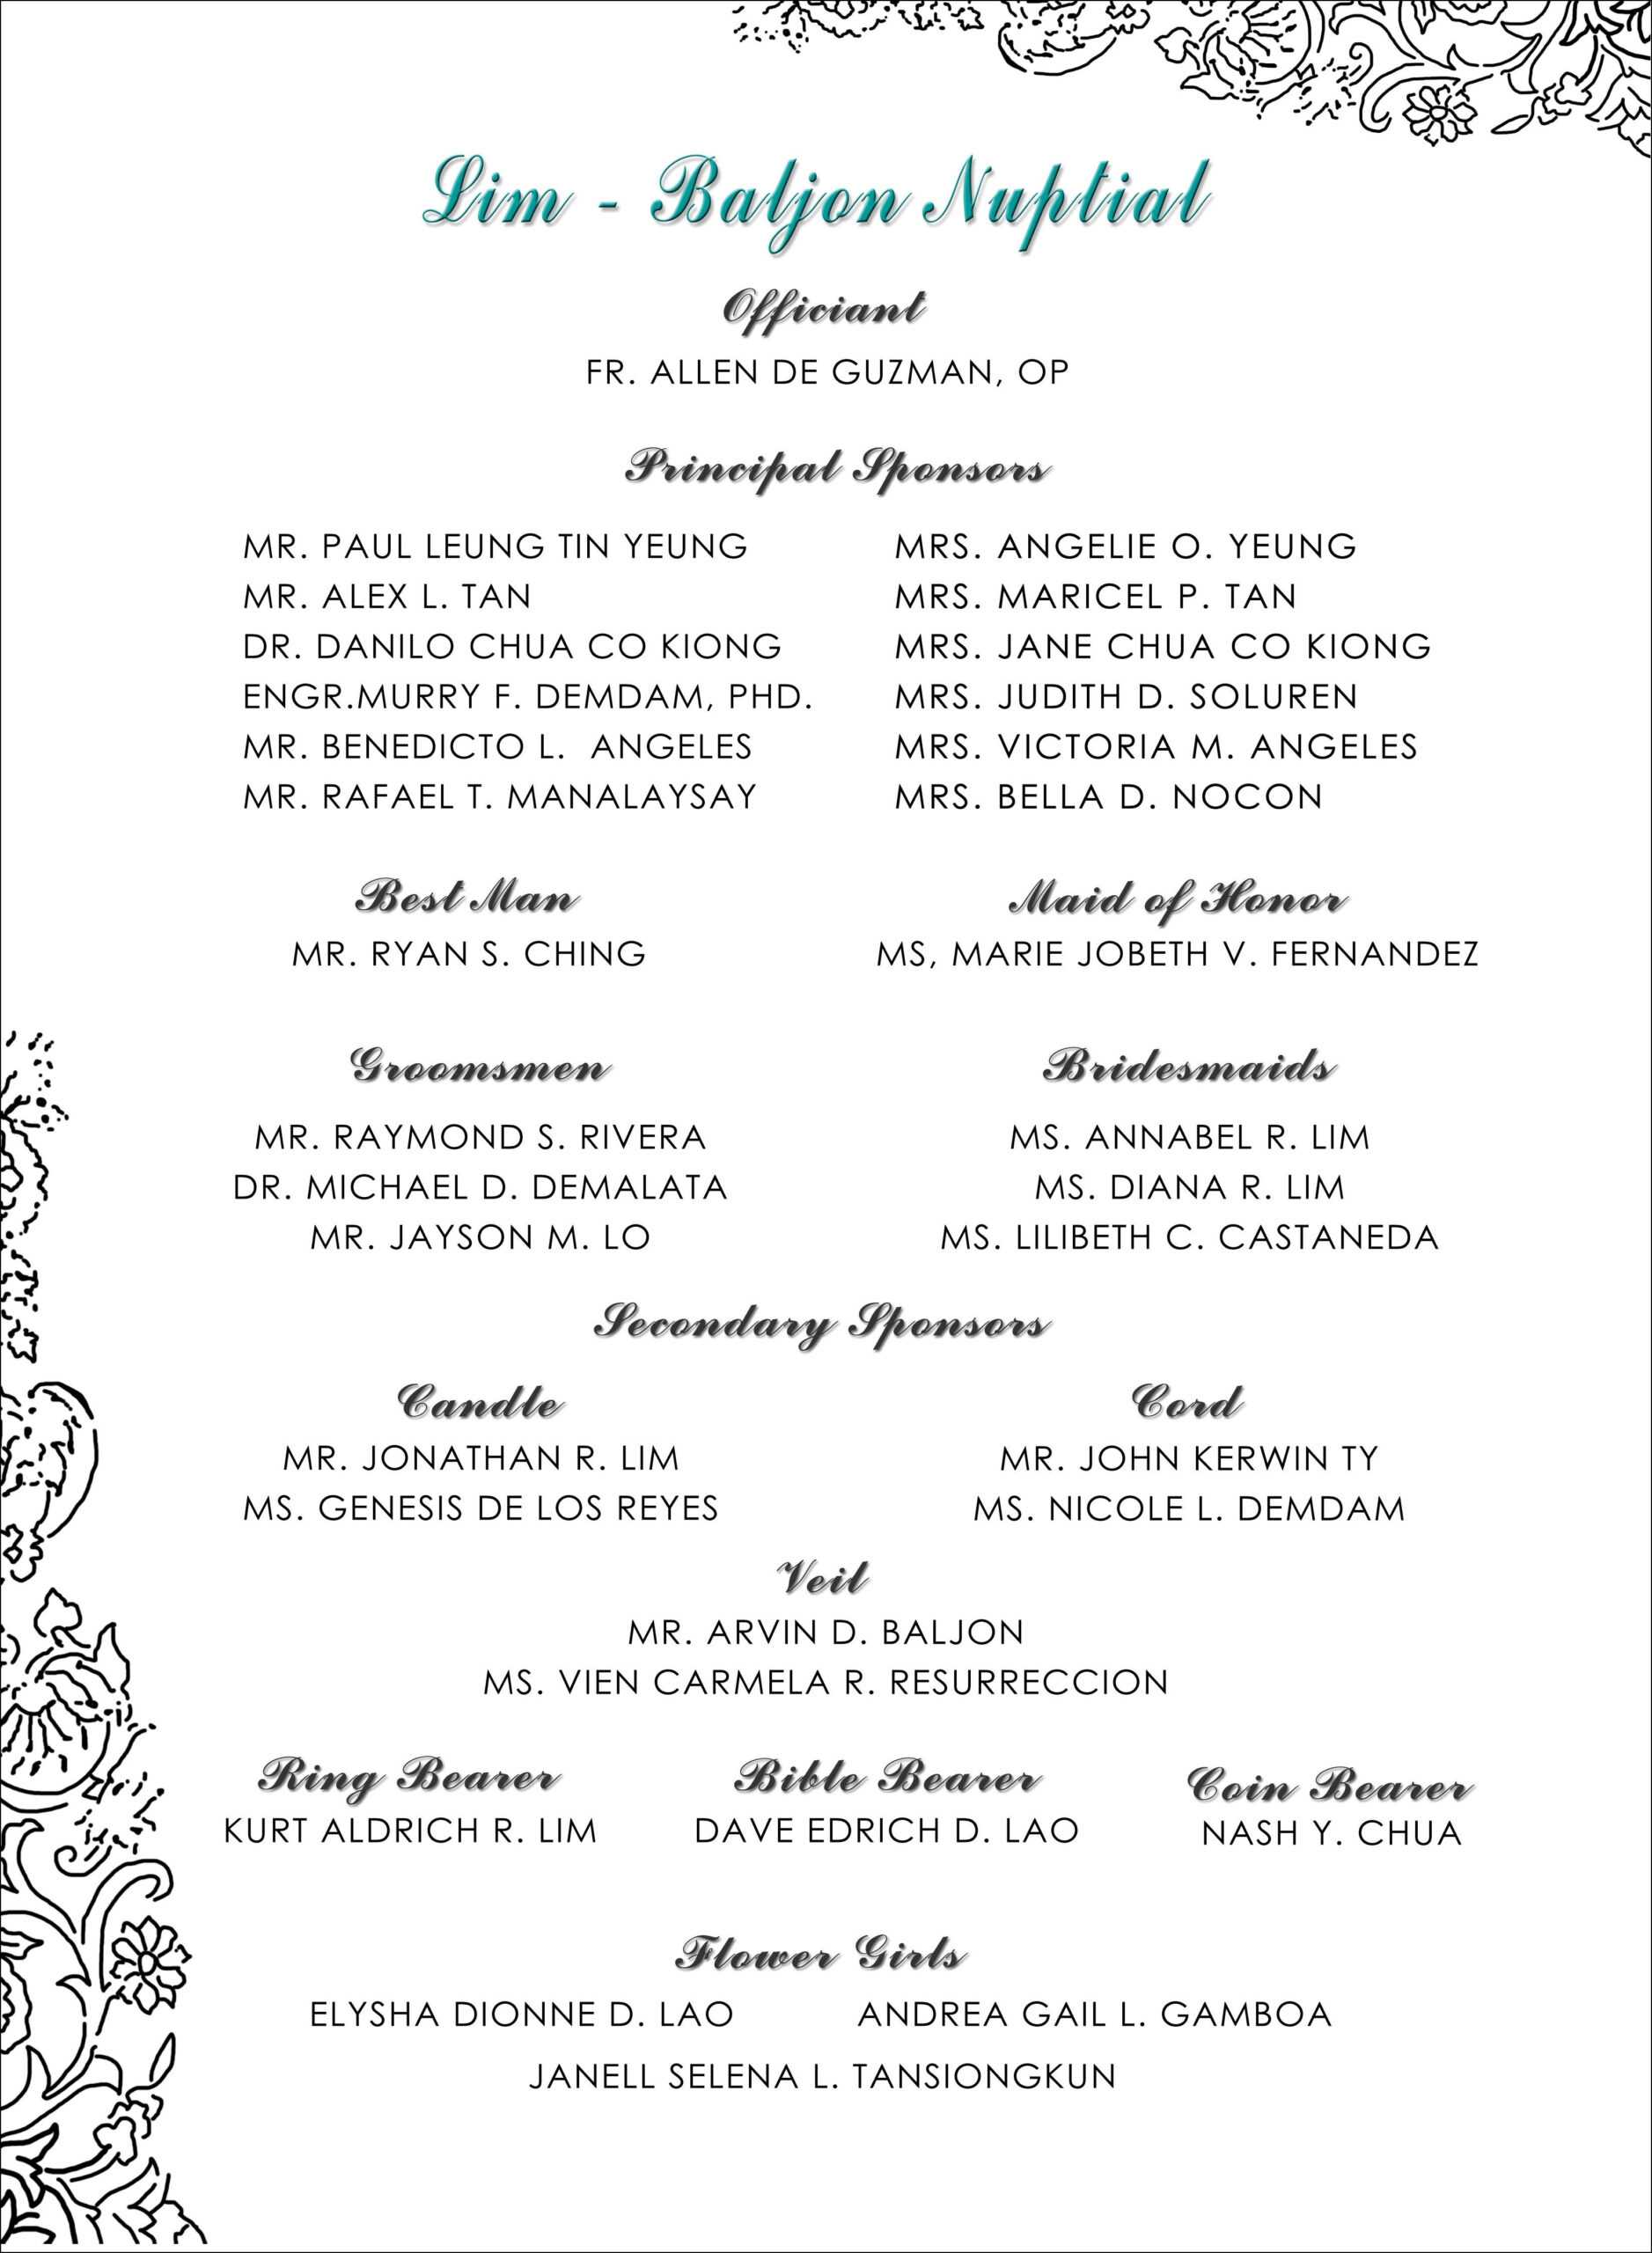 Wedding Invitation With Sponsors In 2019 | Wedding For Sponsor Card Template